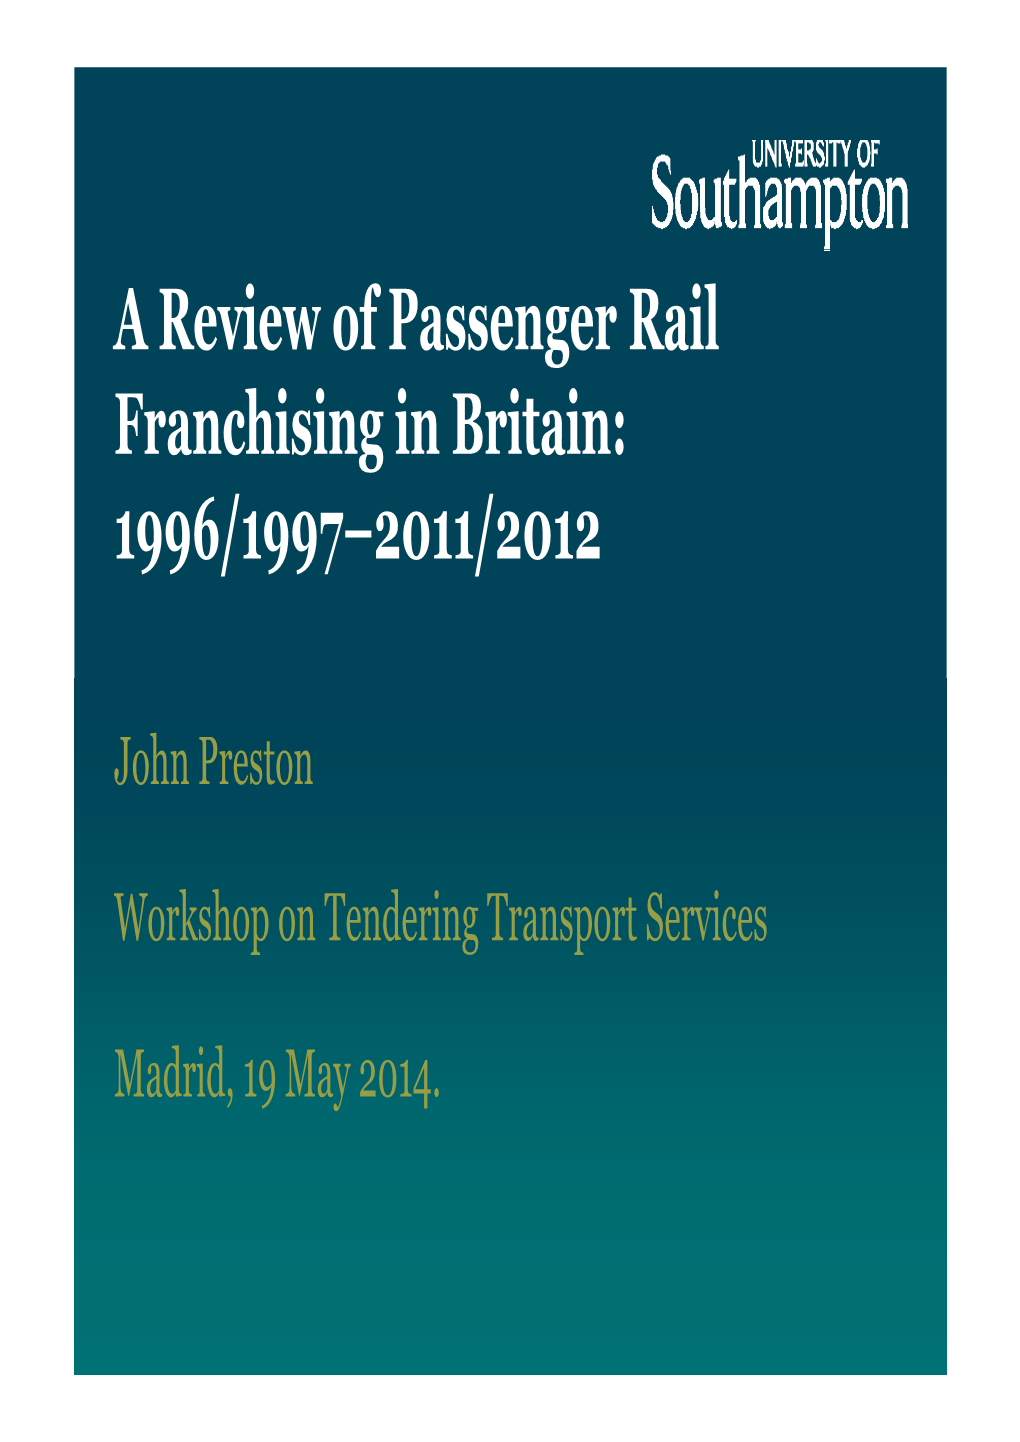 A Review of Passenger Rail Franchising in Britain: 1996/1997–2011/2012